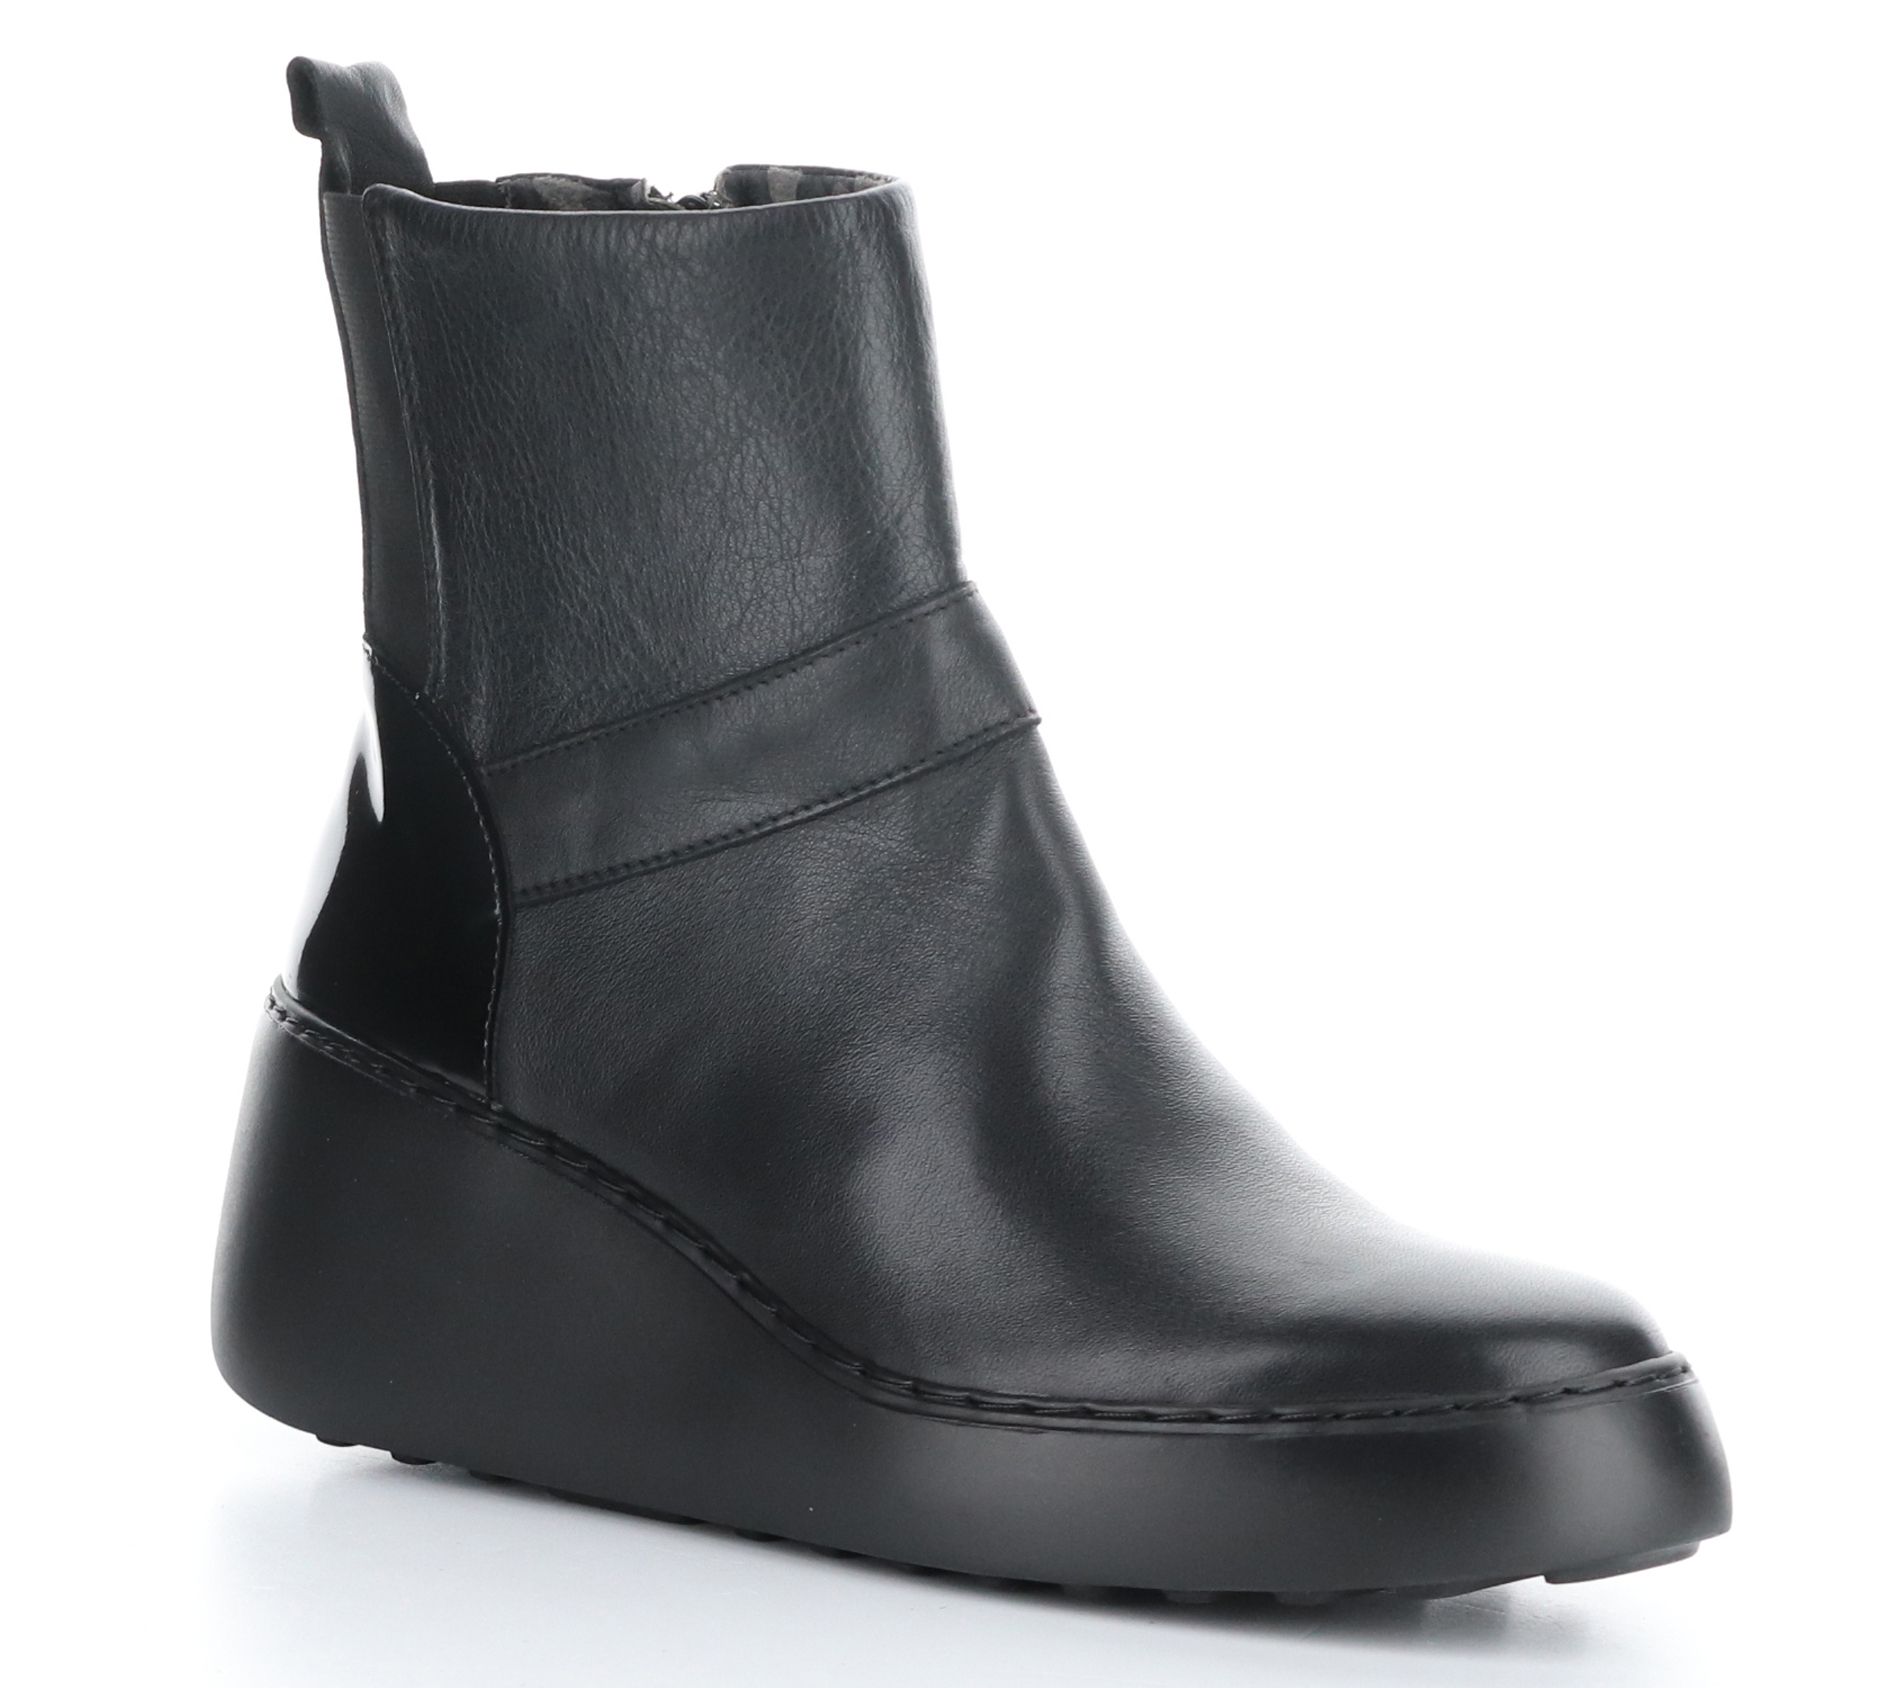 Fly London Zip Up Leather Boots - Doxe - QVC.com